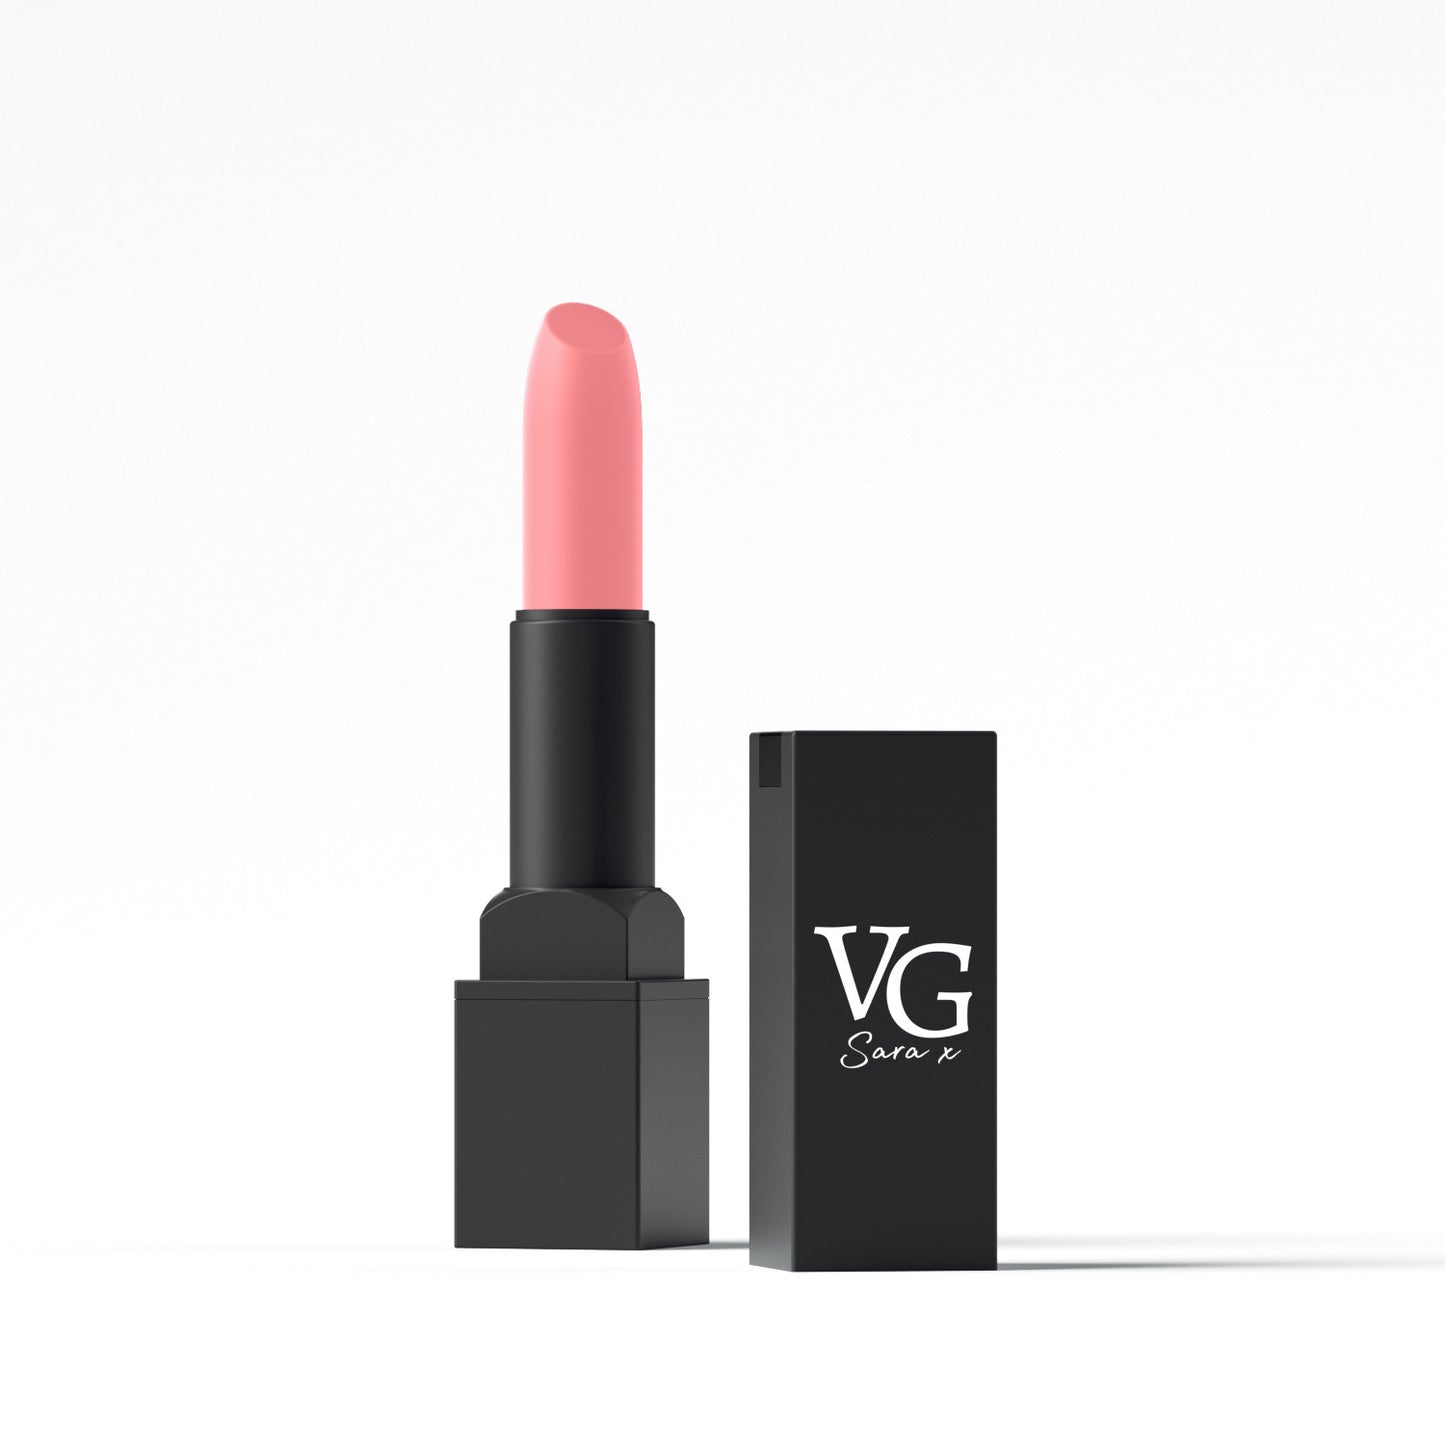 VG Cosmetics natural lipstick presented with its branded box